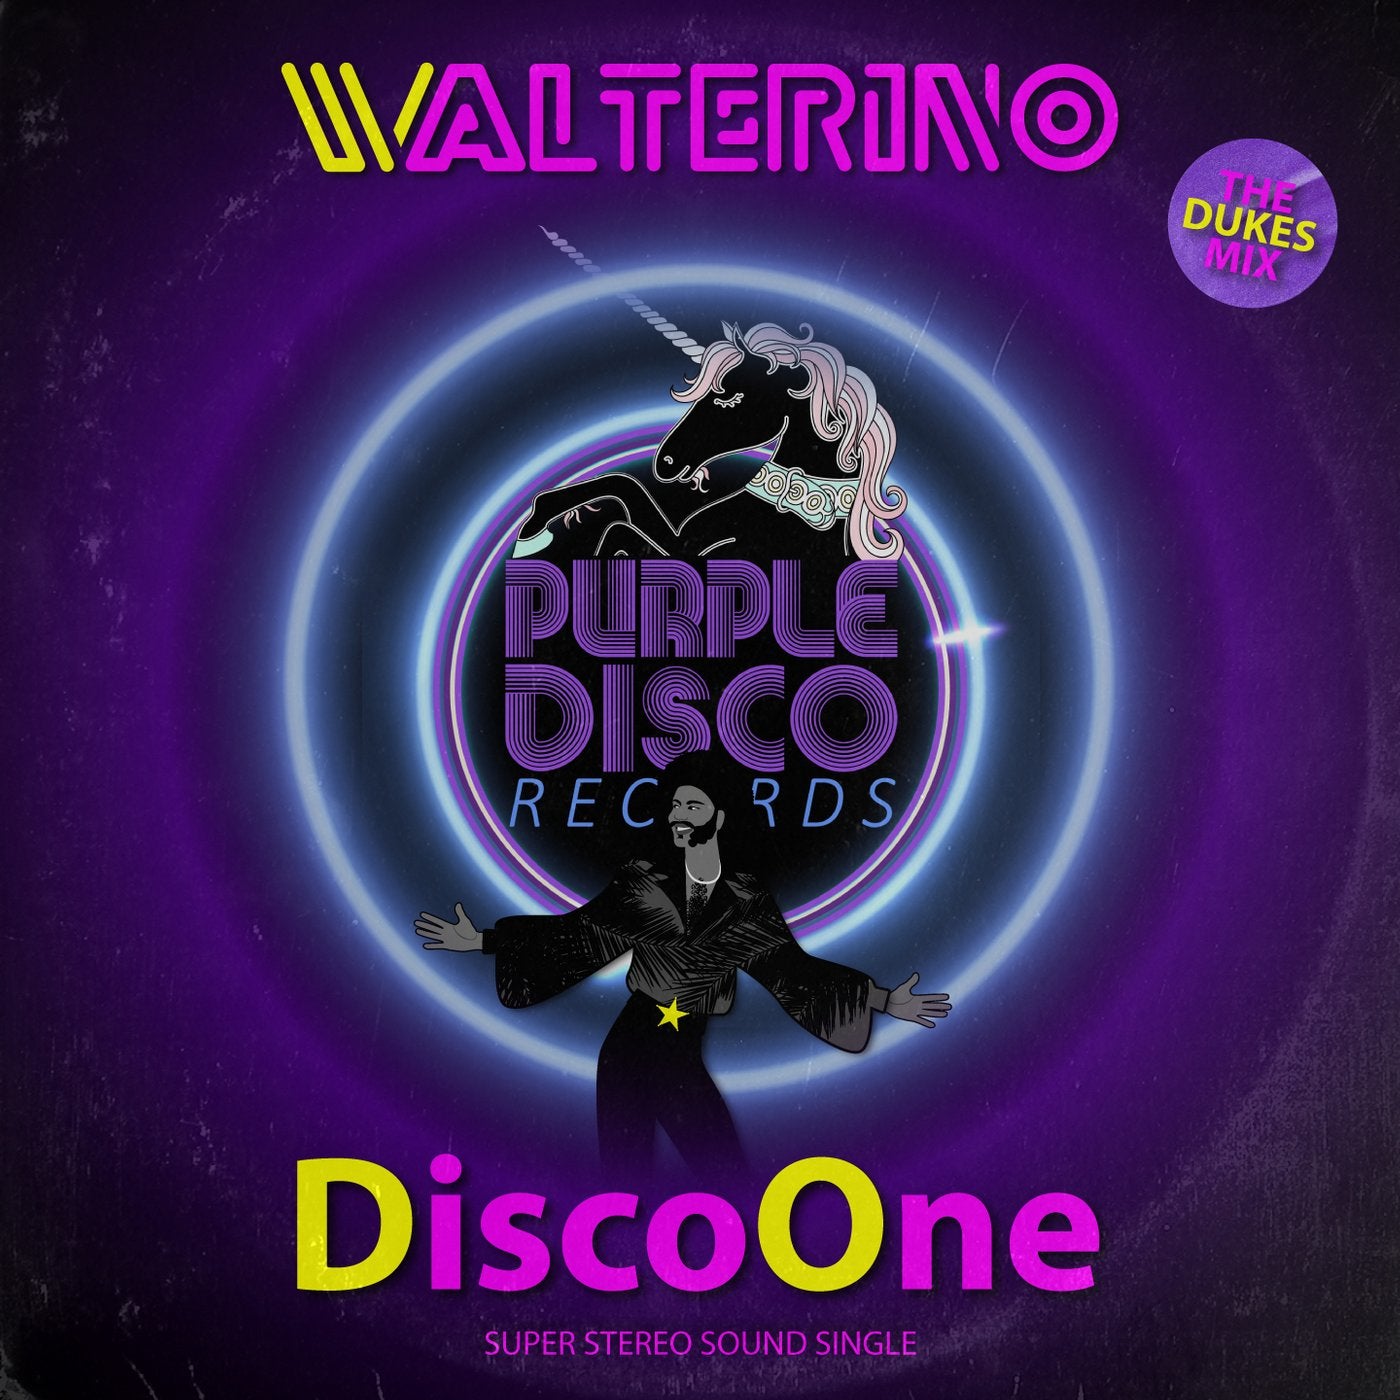 DiscoOne